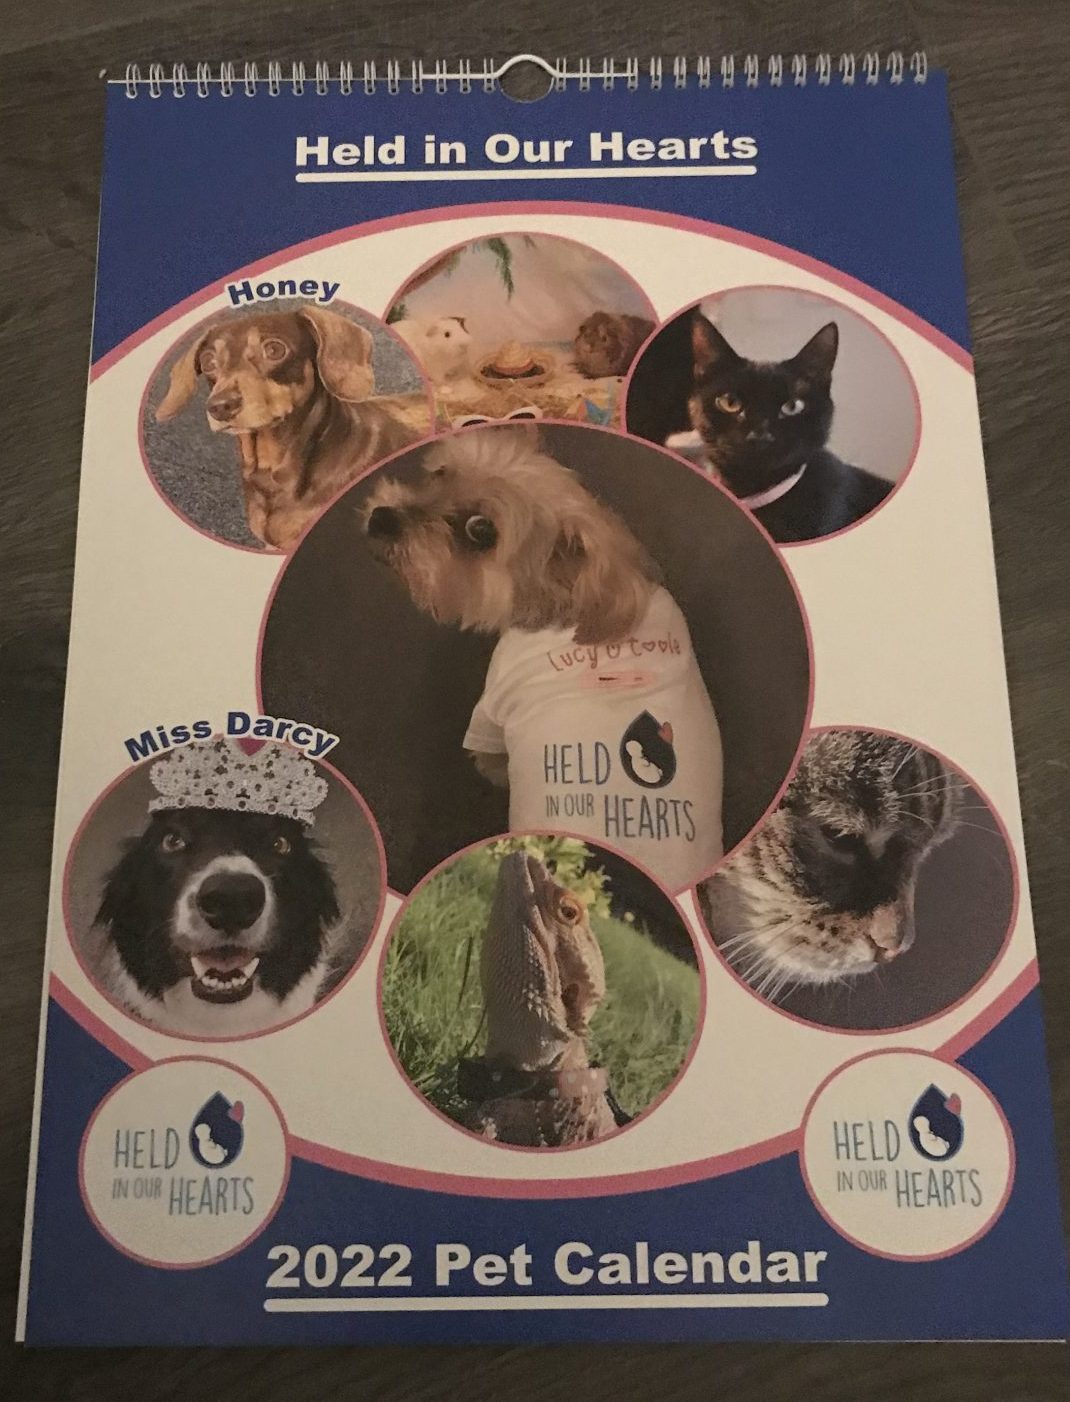 Our new pet calendar has launched!